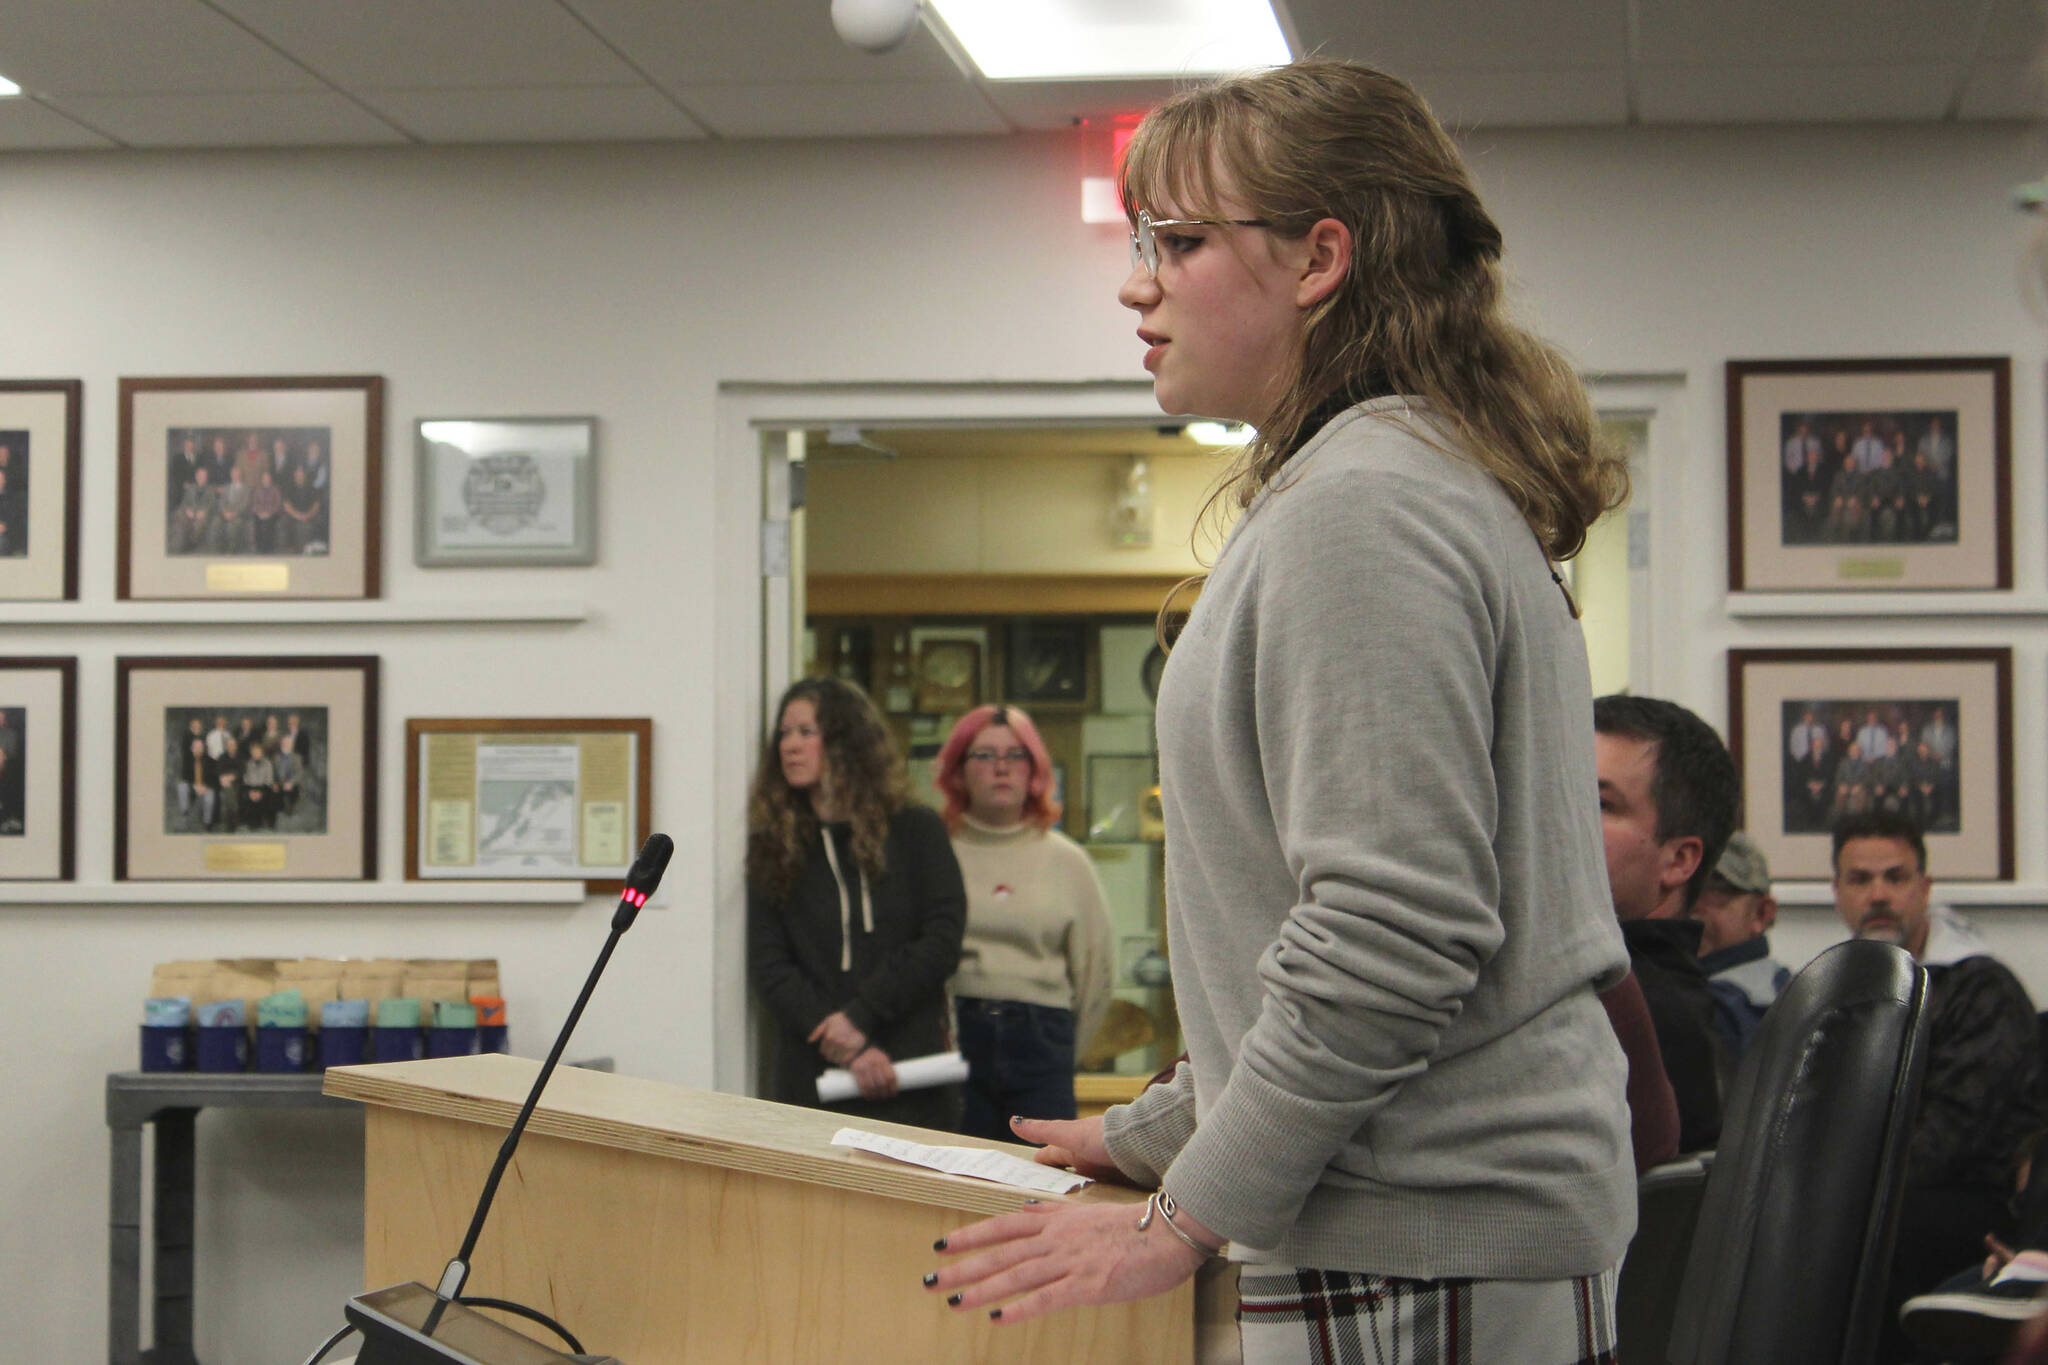 Soldotna High School junior Jaylee Webster testifies in opposition to the proposed cut of Kenai Peninsula Borough School District theater technicians during a board of education meeting on Monday, March 6, 2023, in Soldotna, Alaska. (Ashlyn O’Hara/Peninsula Clarion)